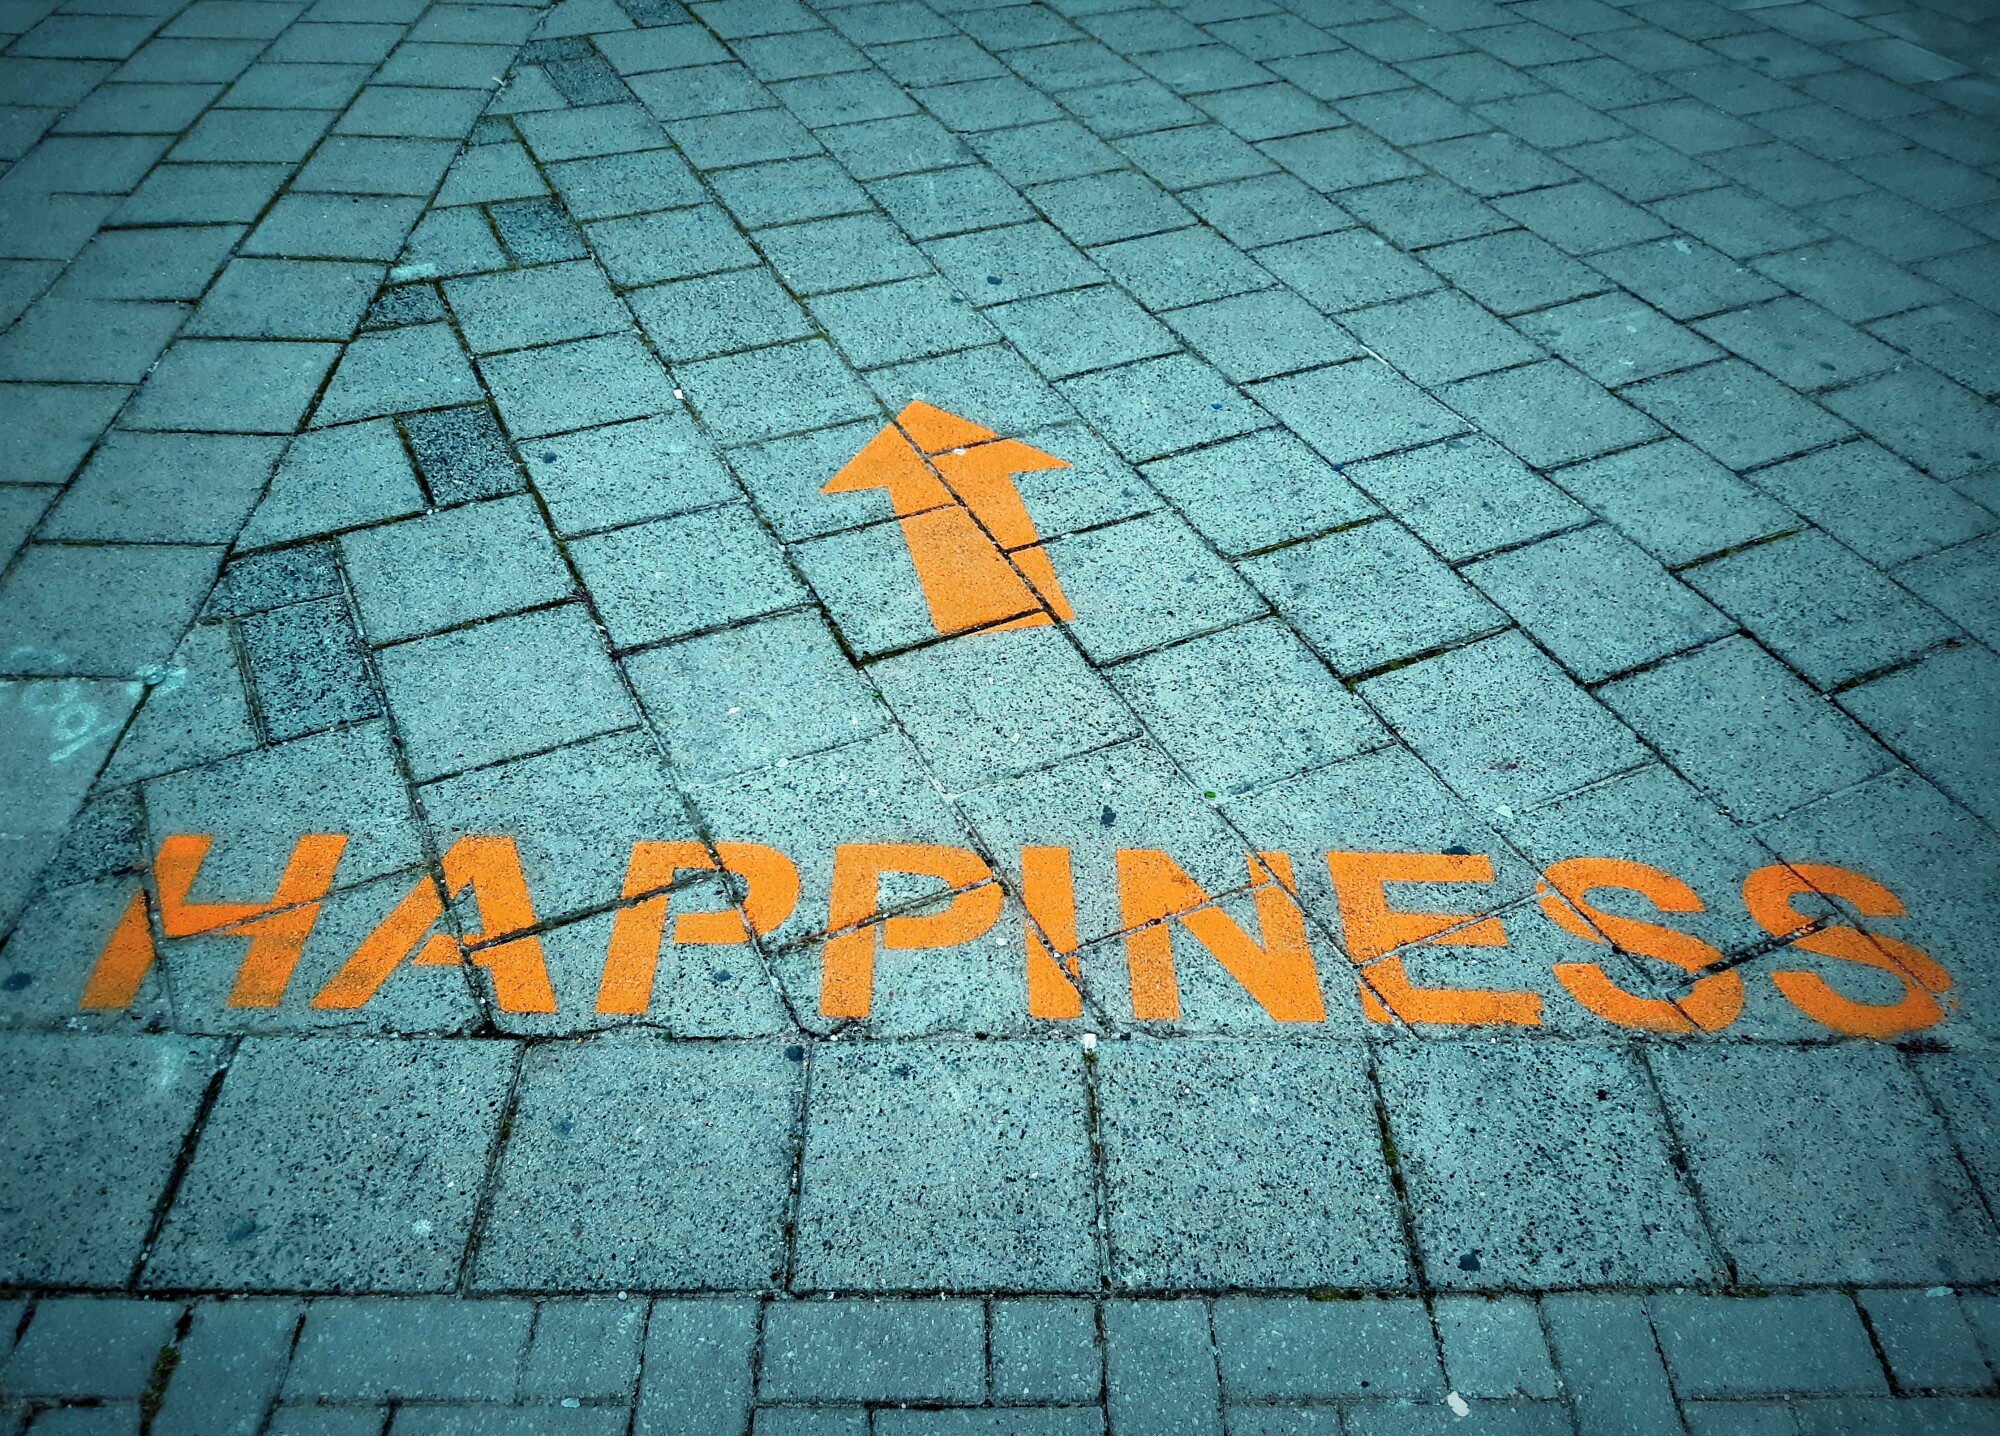 picture of sidewalk with the word "happiness" and an arrow pointing